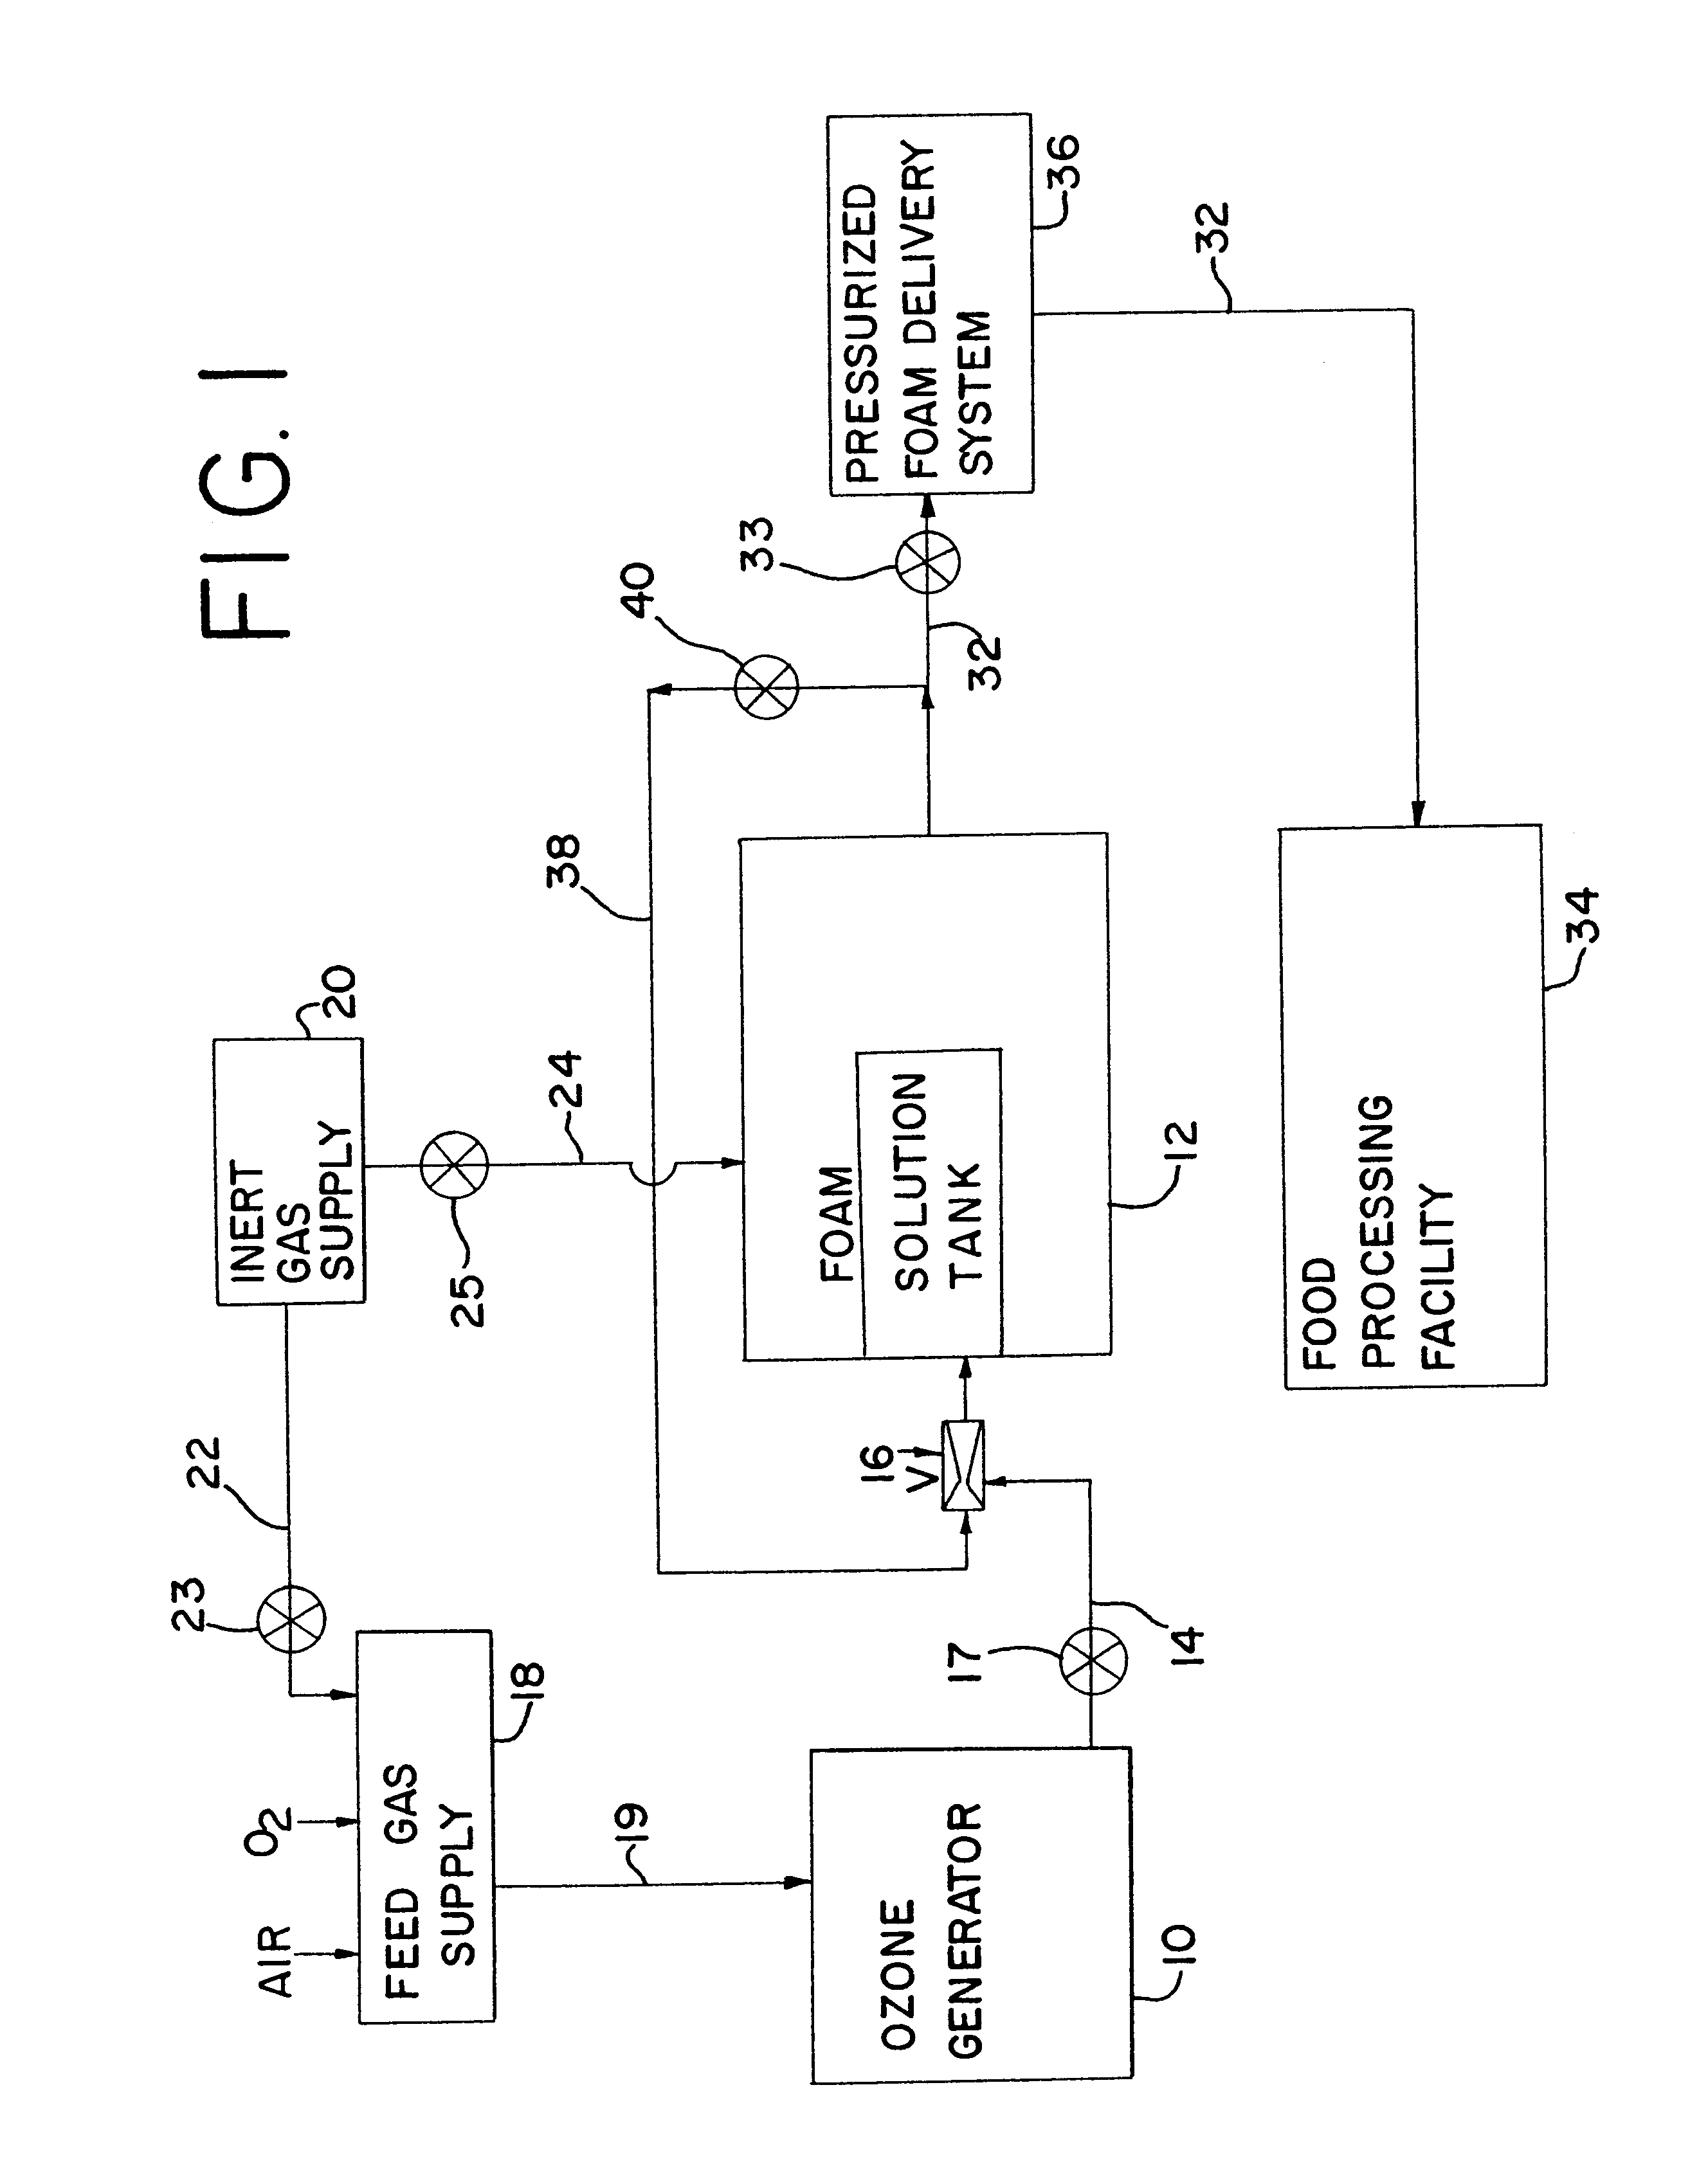 Ozonated foam medium and production system and method for sanitizing a food processing environment